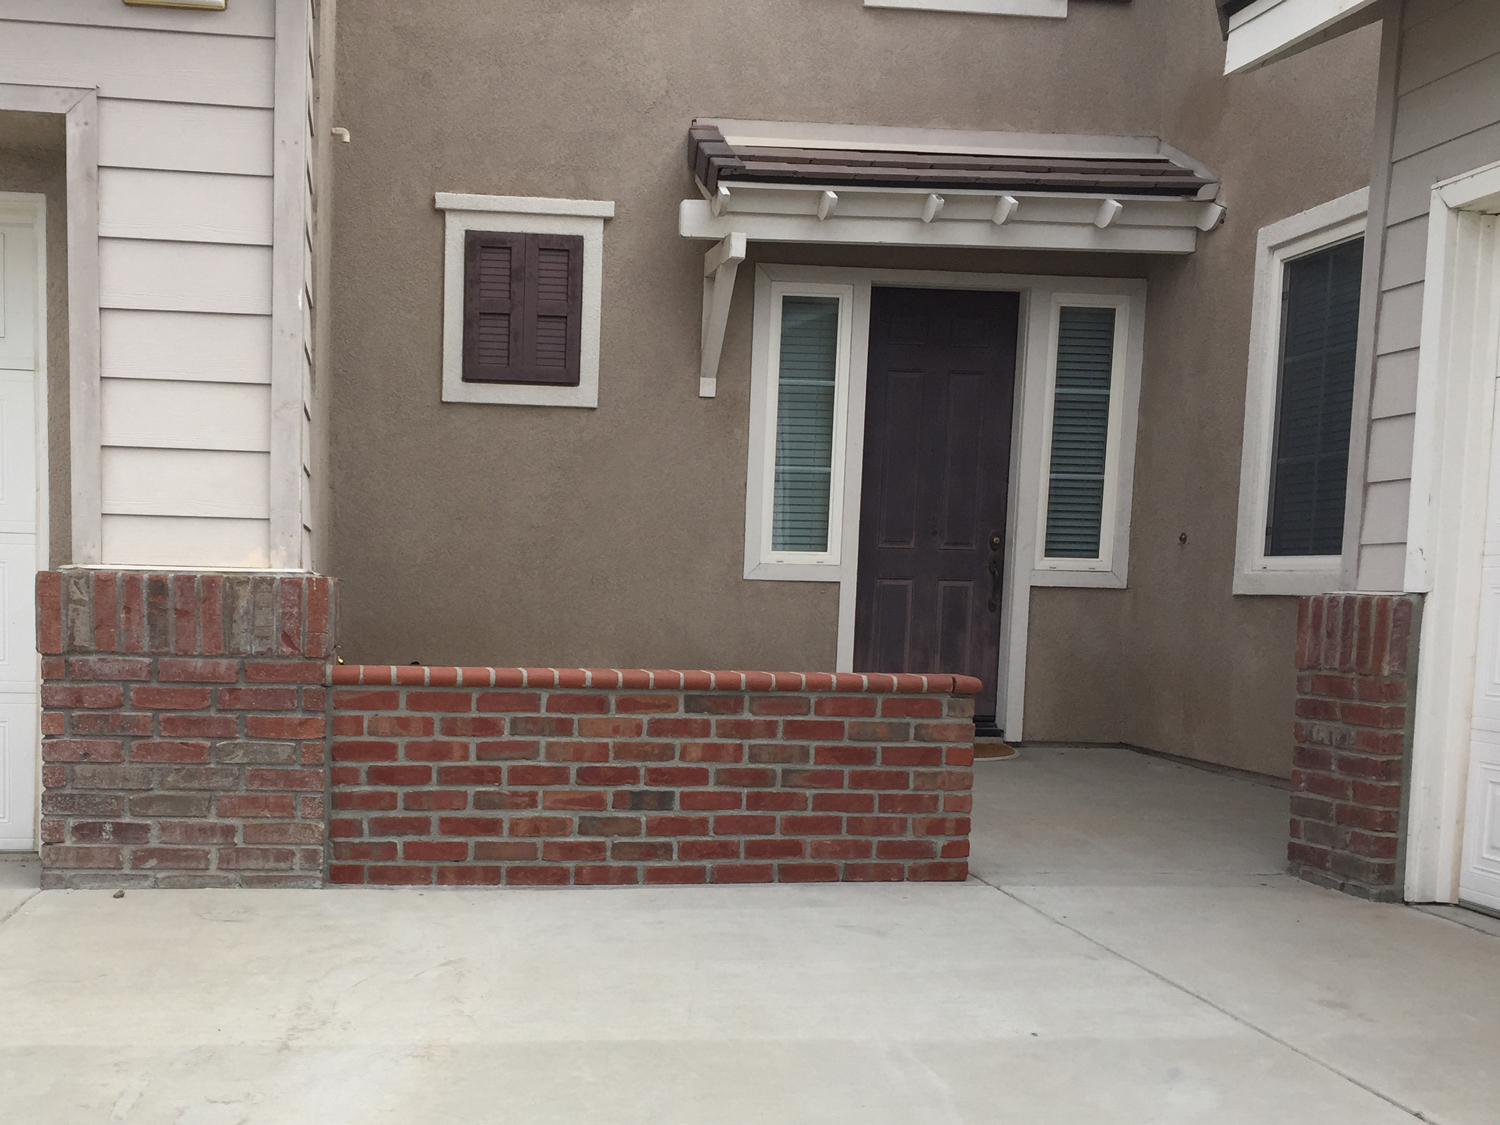 Brick faced wall in front courtyard in Temecula McCabe's Landscape Construction